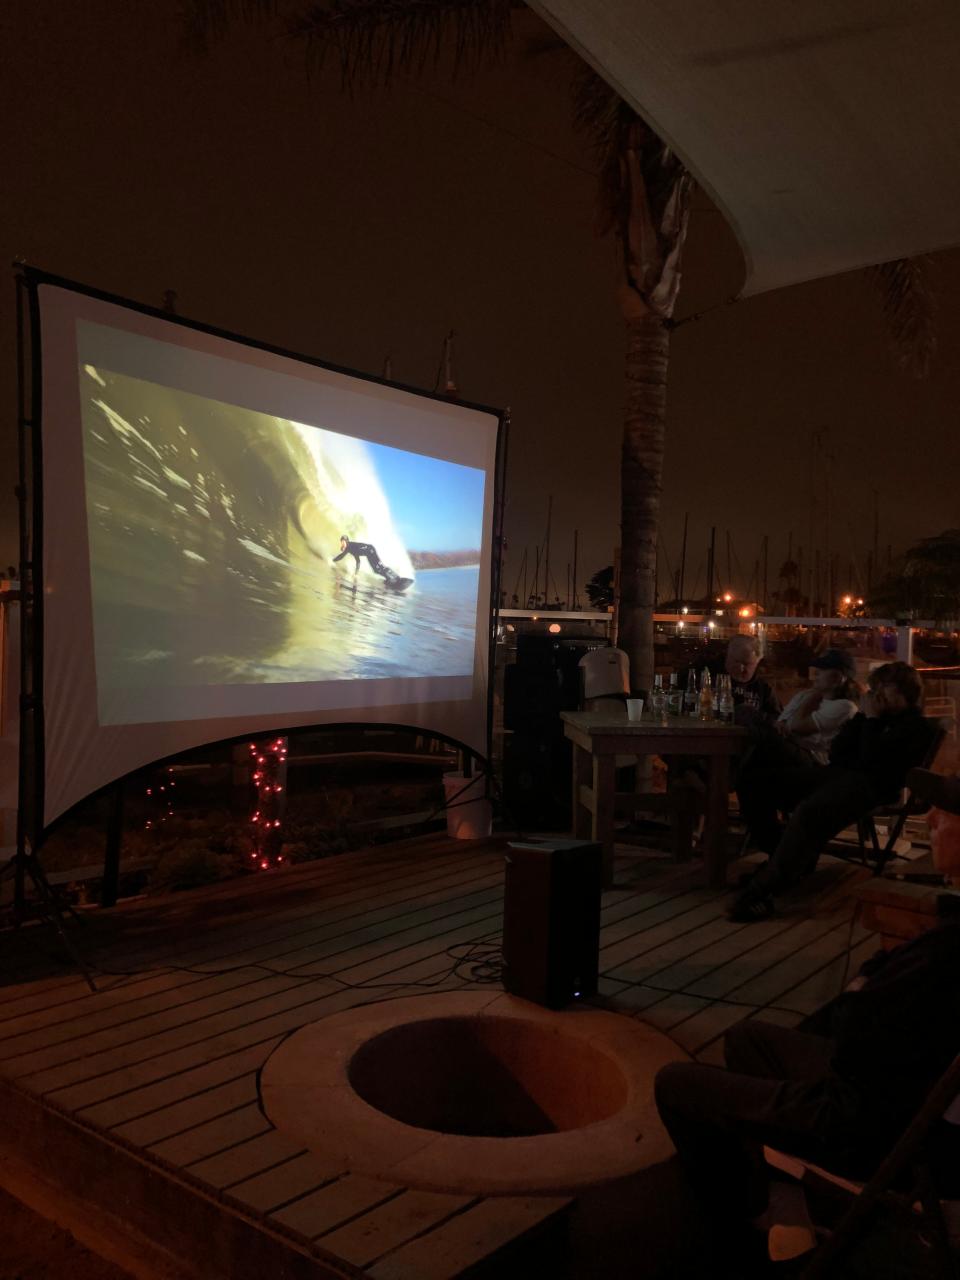 The new surf film "Locals Only," featuring Ventura County surfers, played continuously during a benefit for the nonprofit Project Moonlight held in Oxnard on Saturday, Aug. 27, 2022.